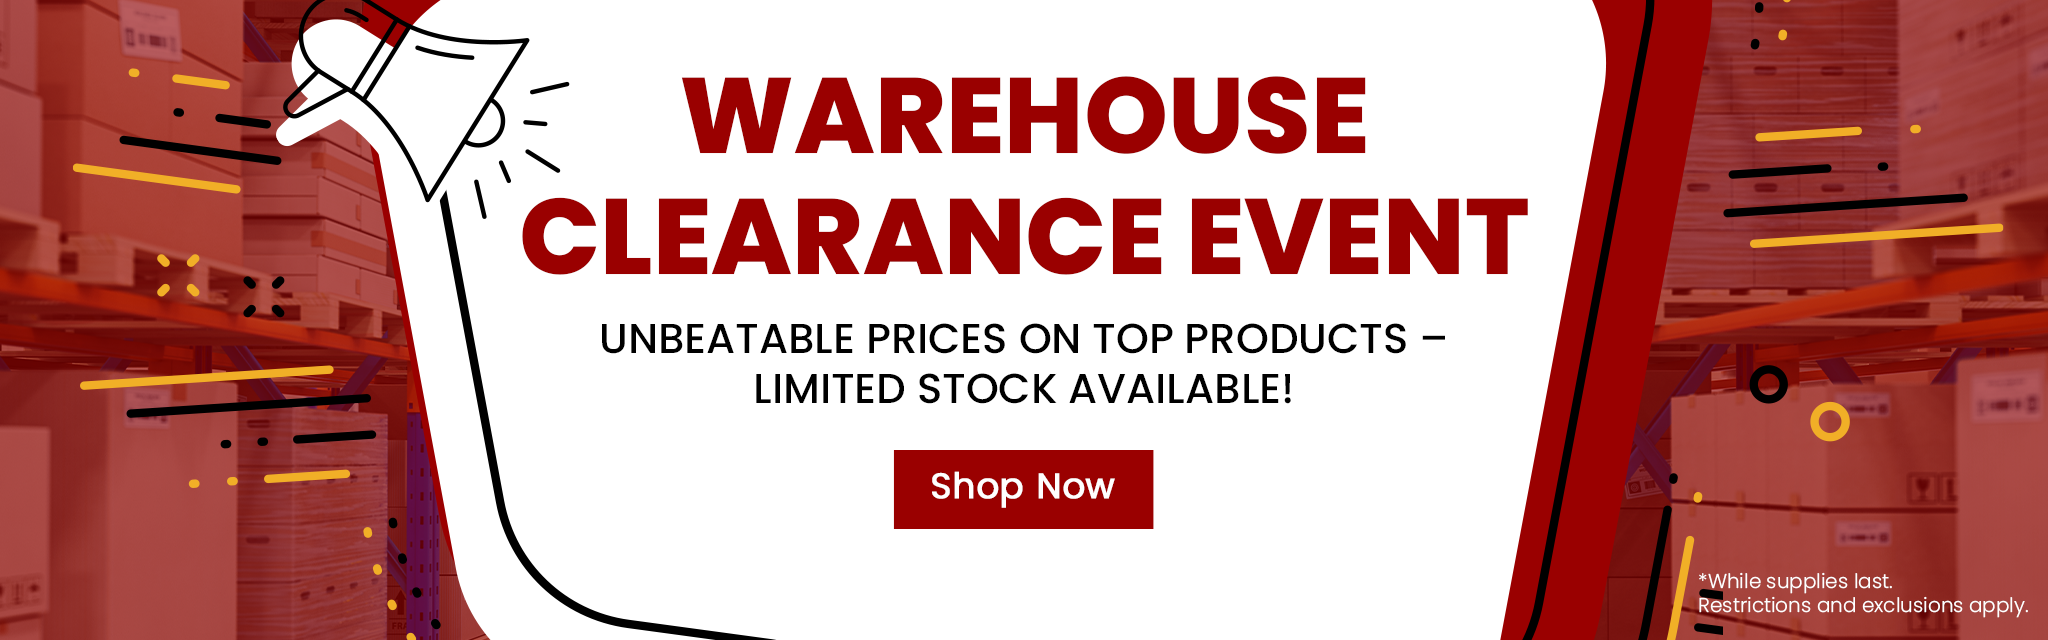 Warehouse Clearance Event. Unbeatable price on top products - limited stock available! Shop Now